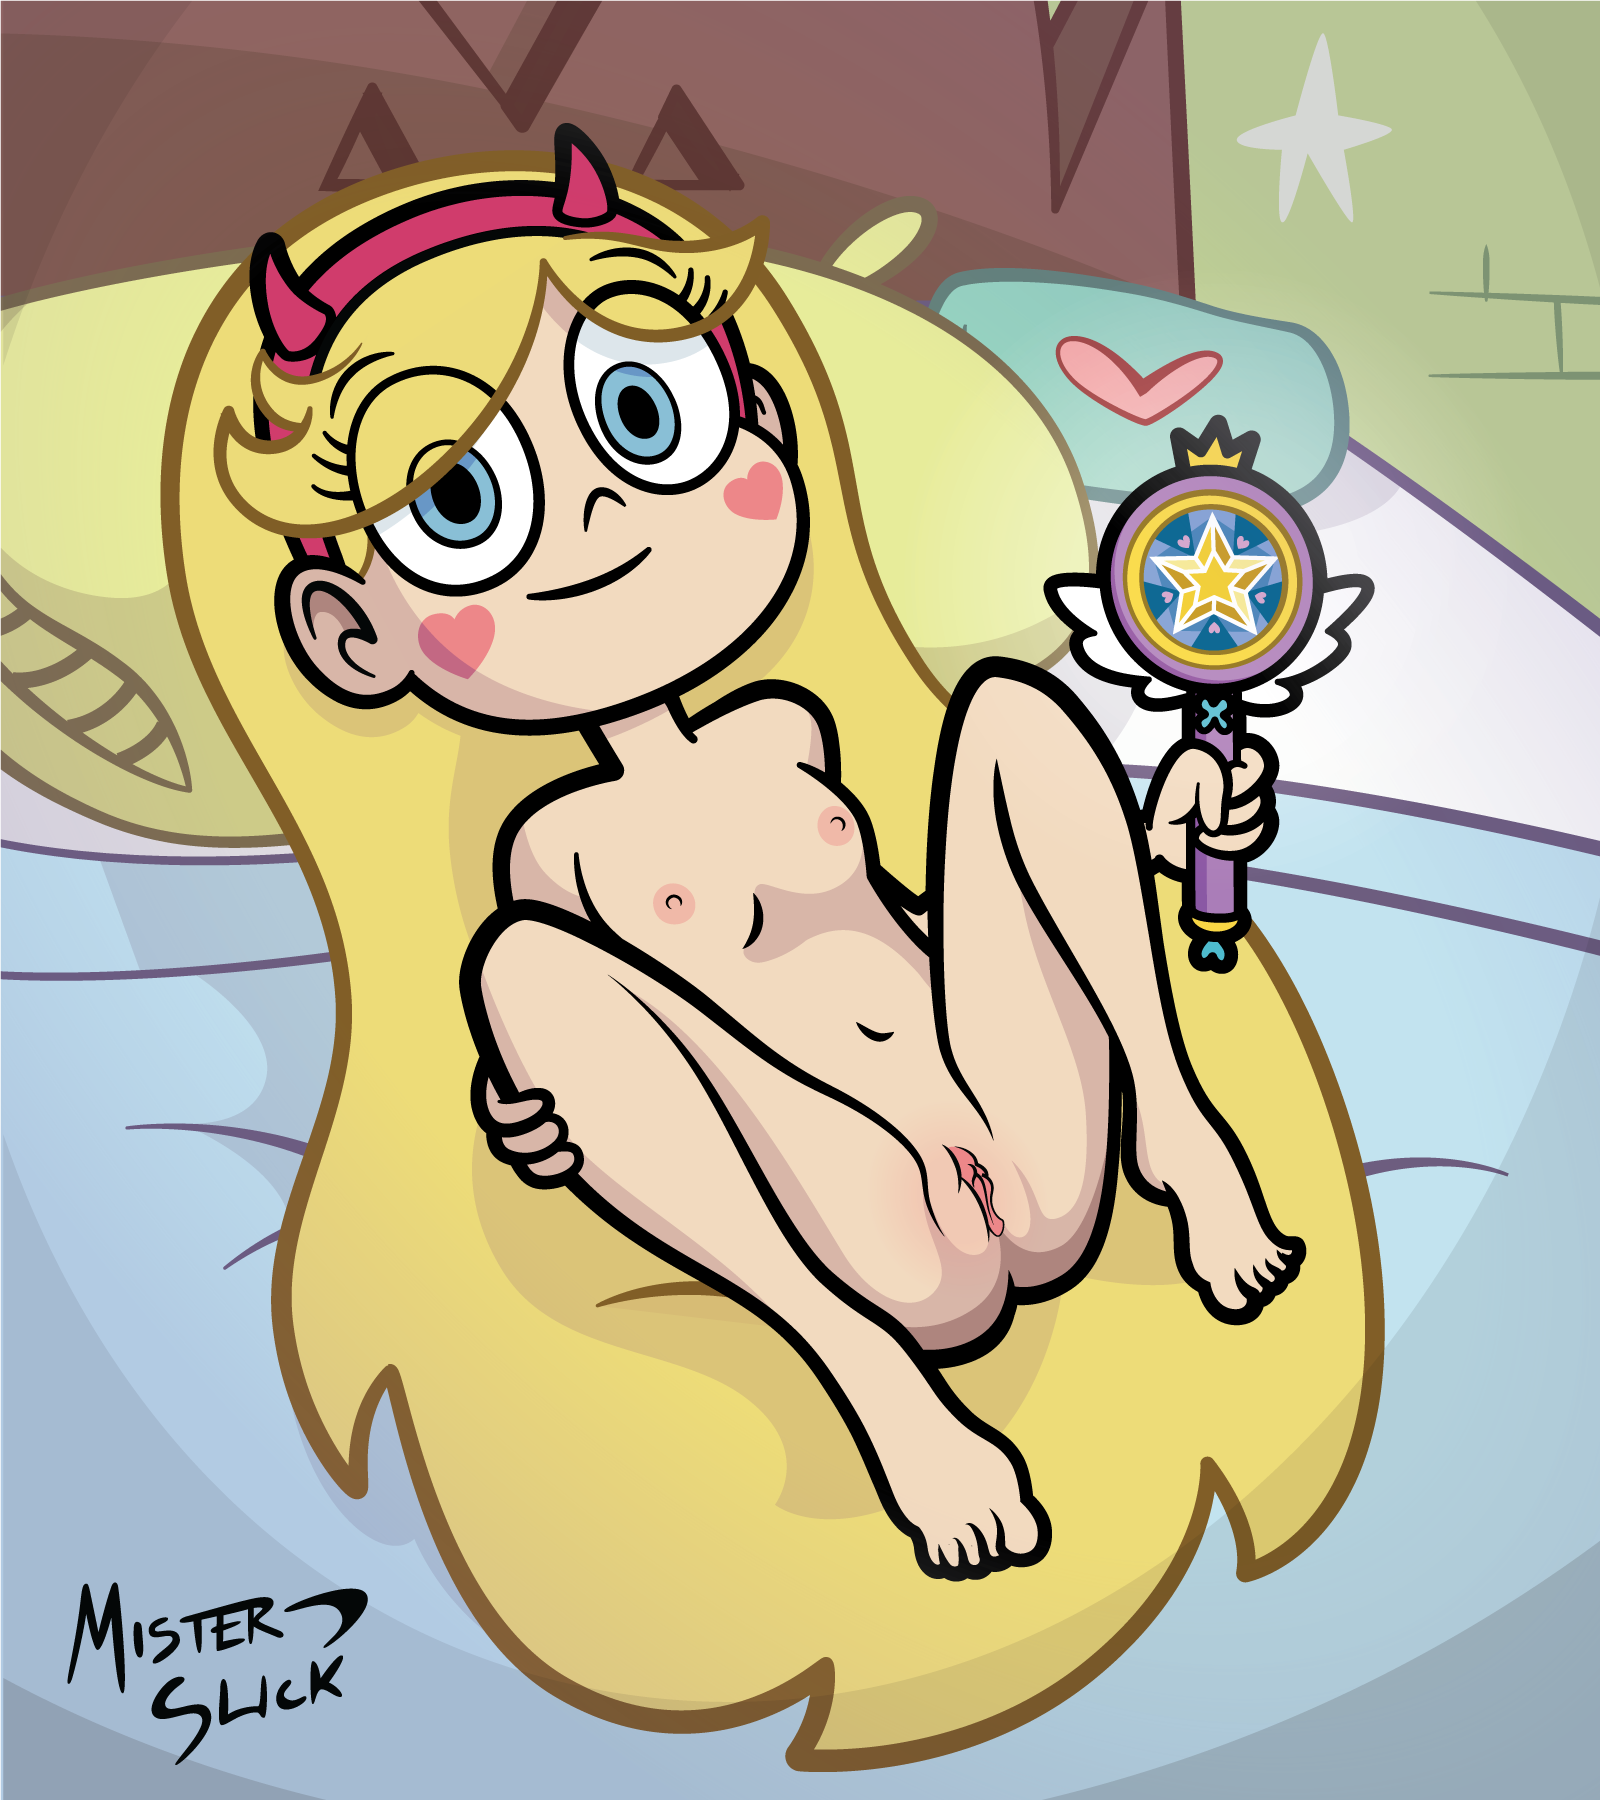 Star butterfly nudes